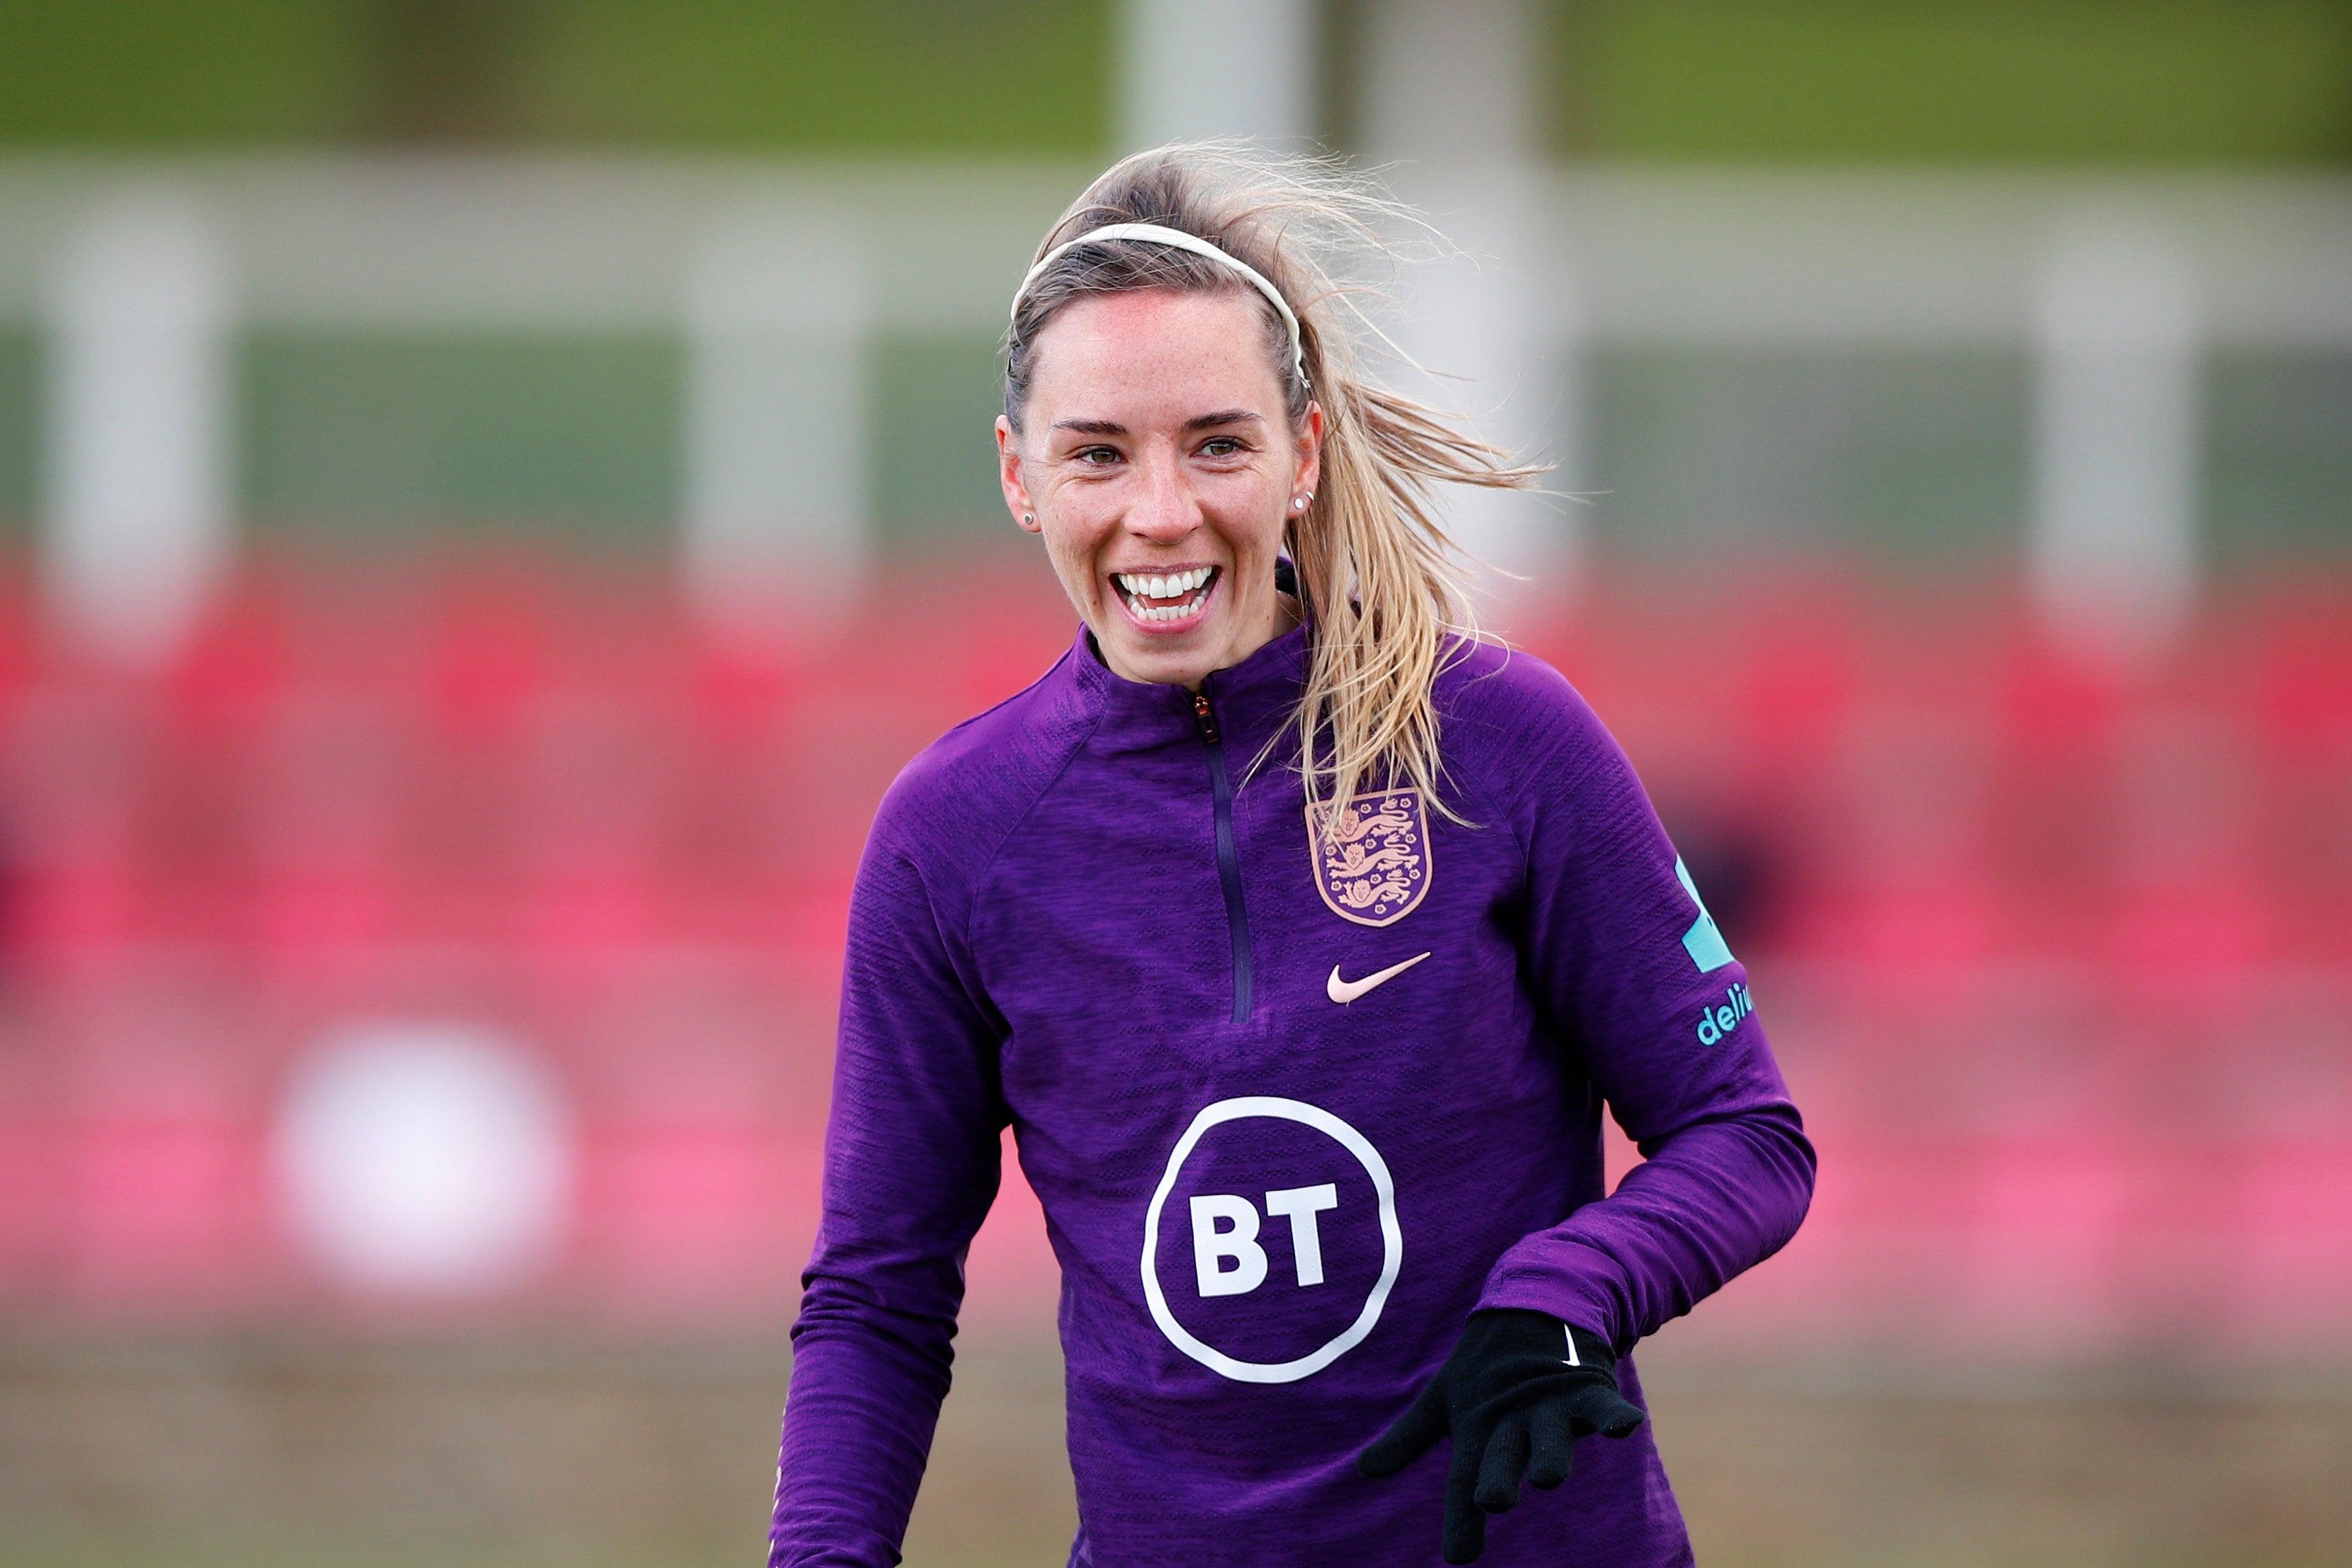 Jordan Nobbs has been selected by Sarina Wiegman for the first time